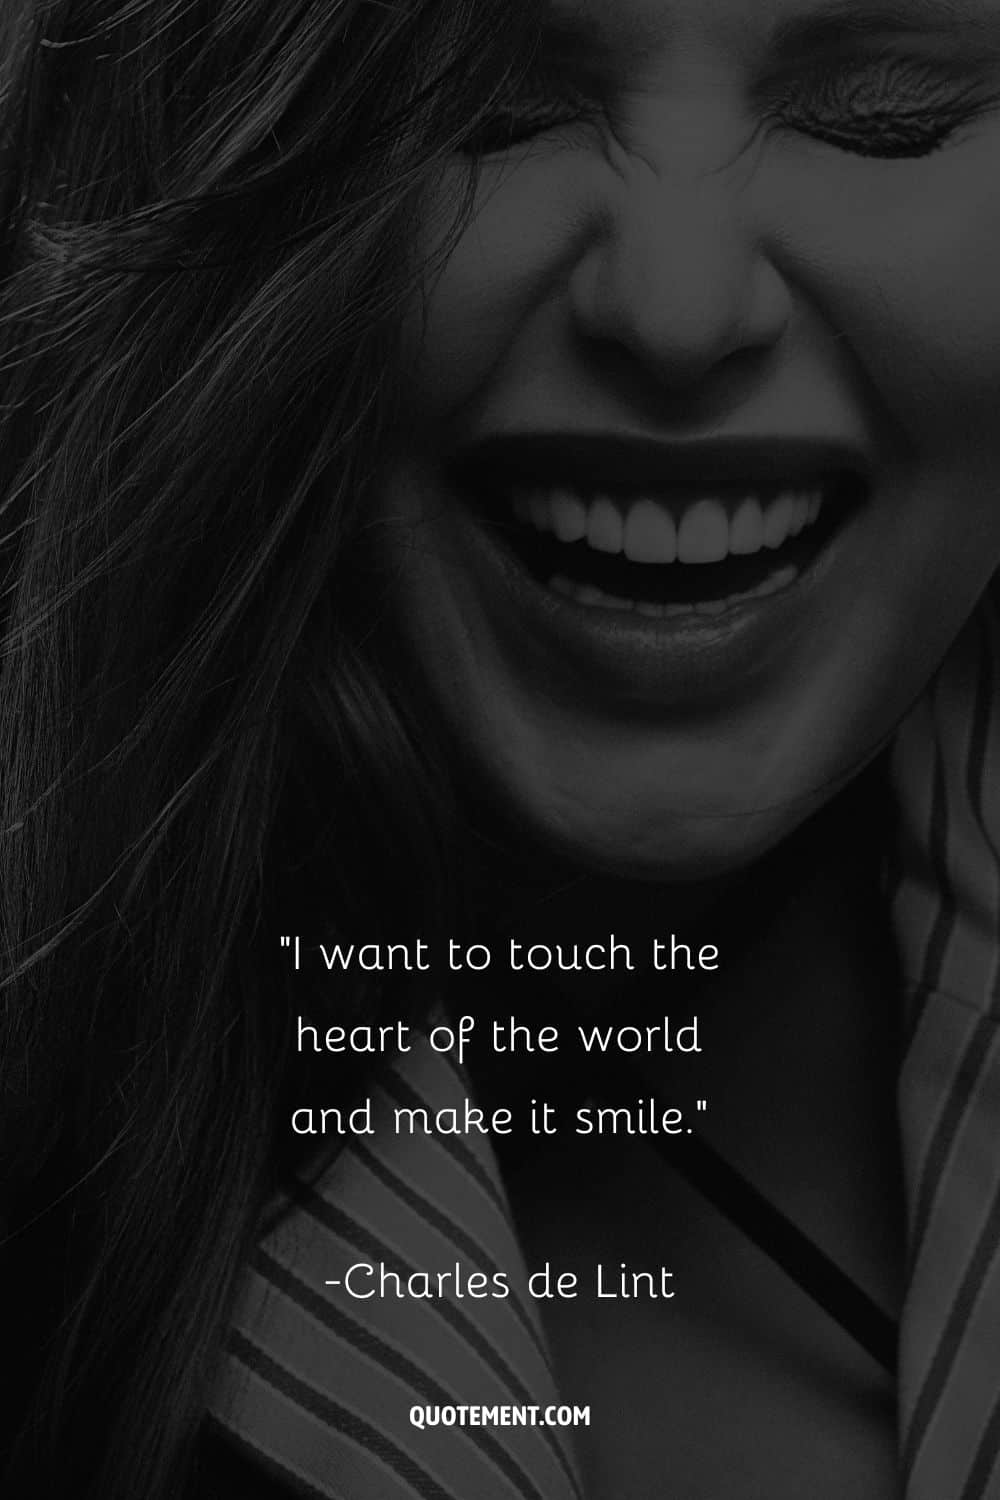 girl in black and white smiling, representing smile caption for profile